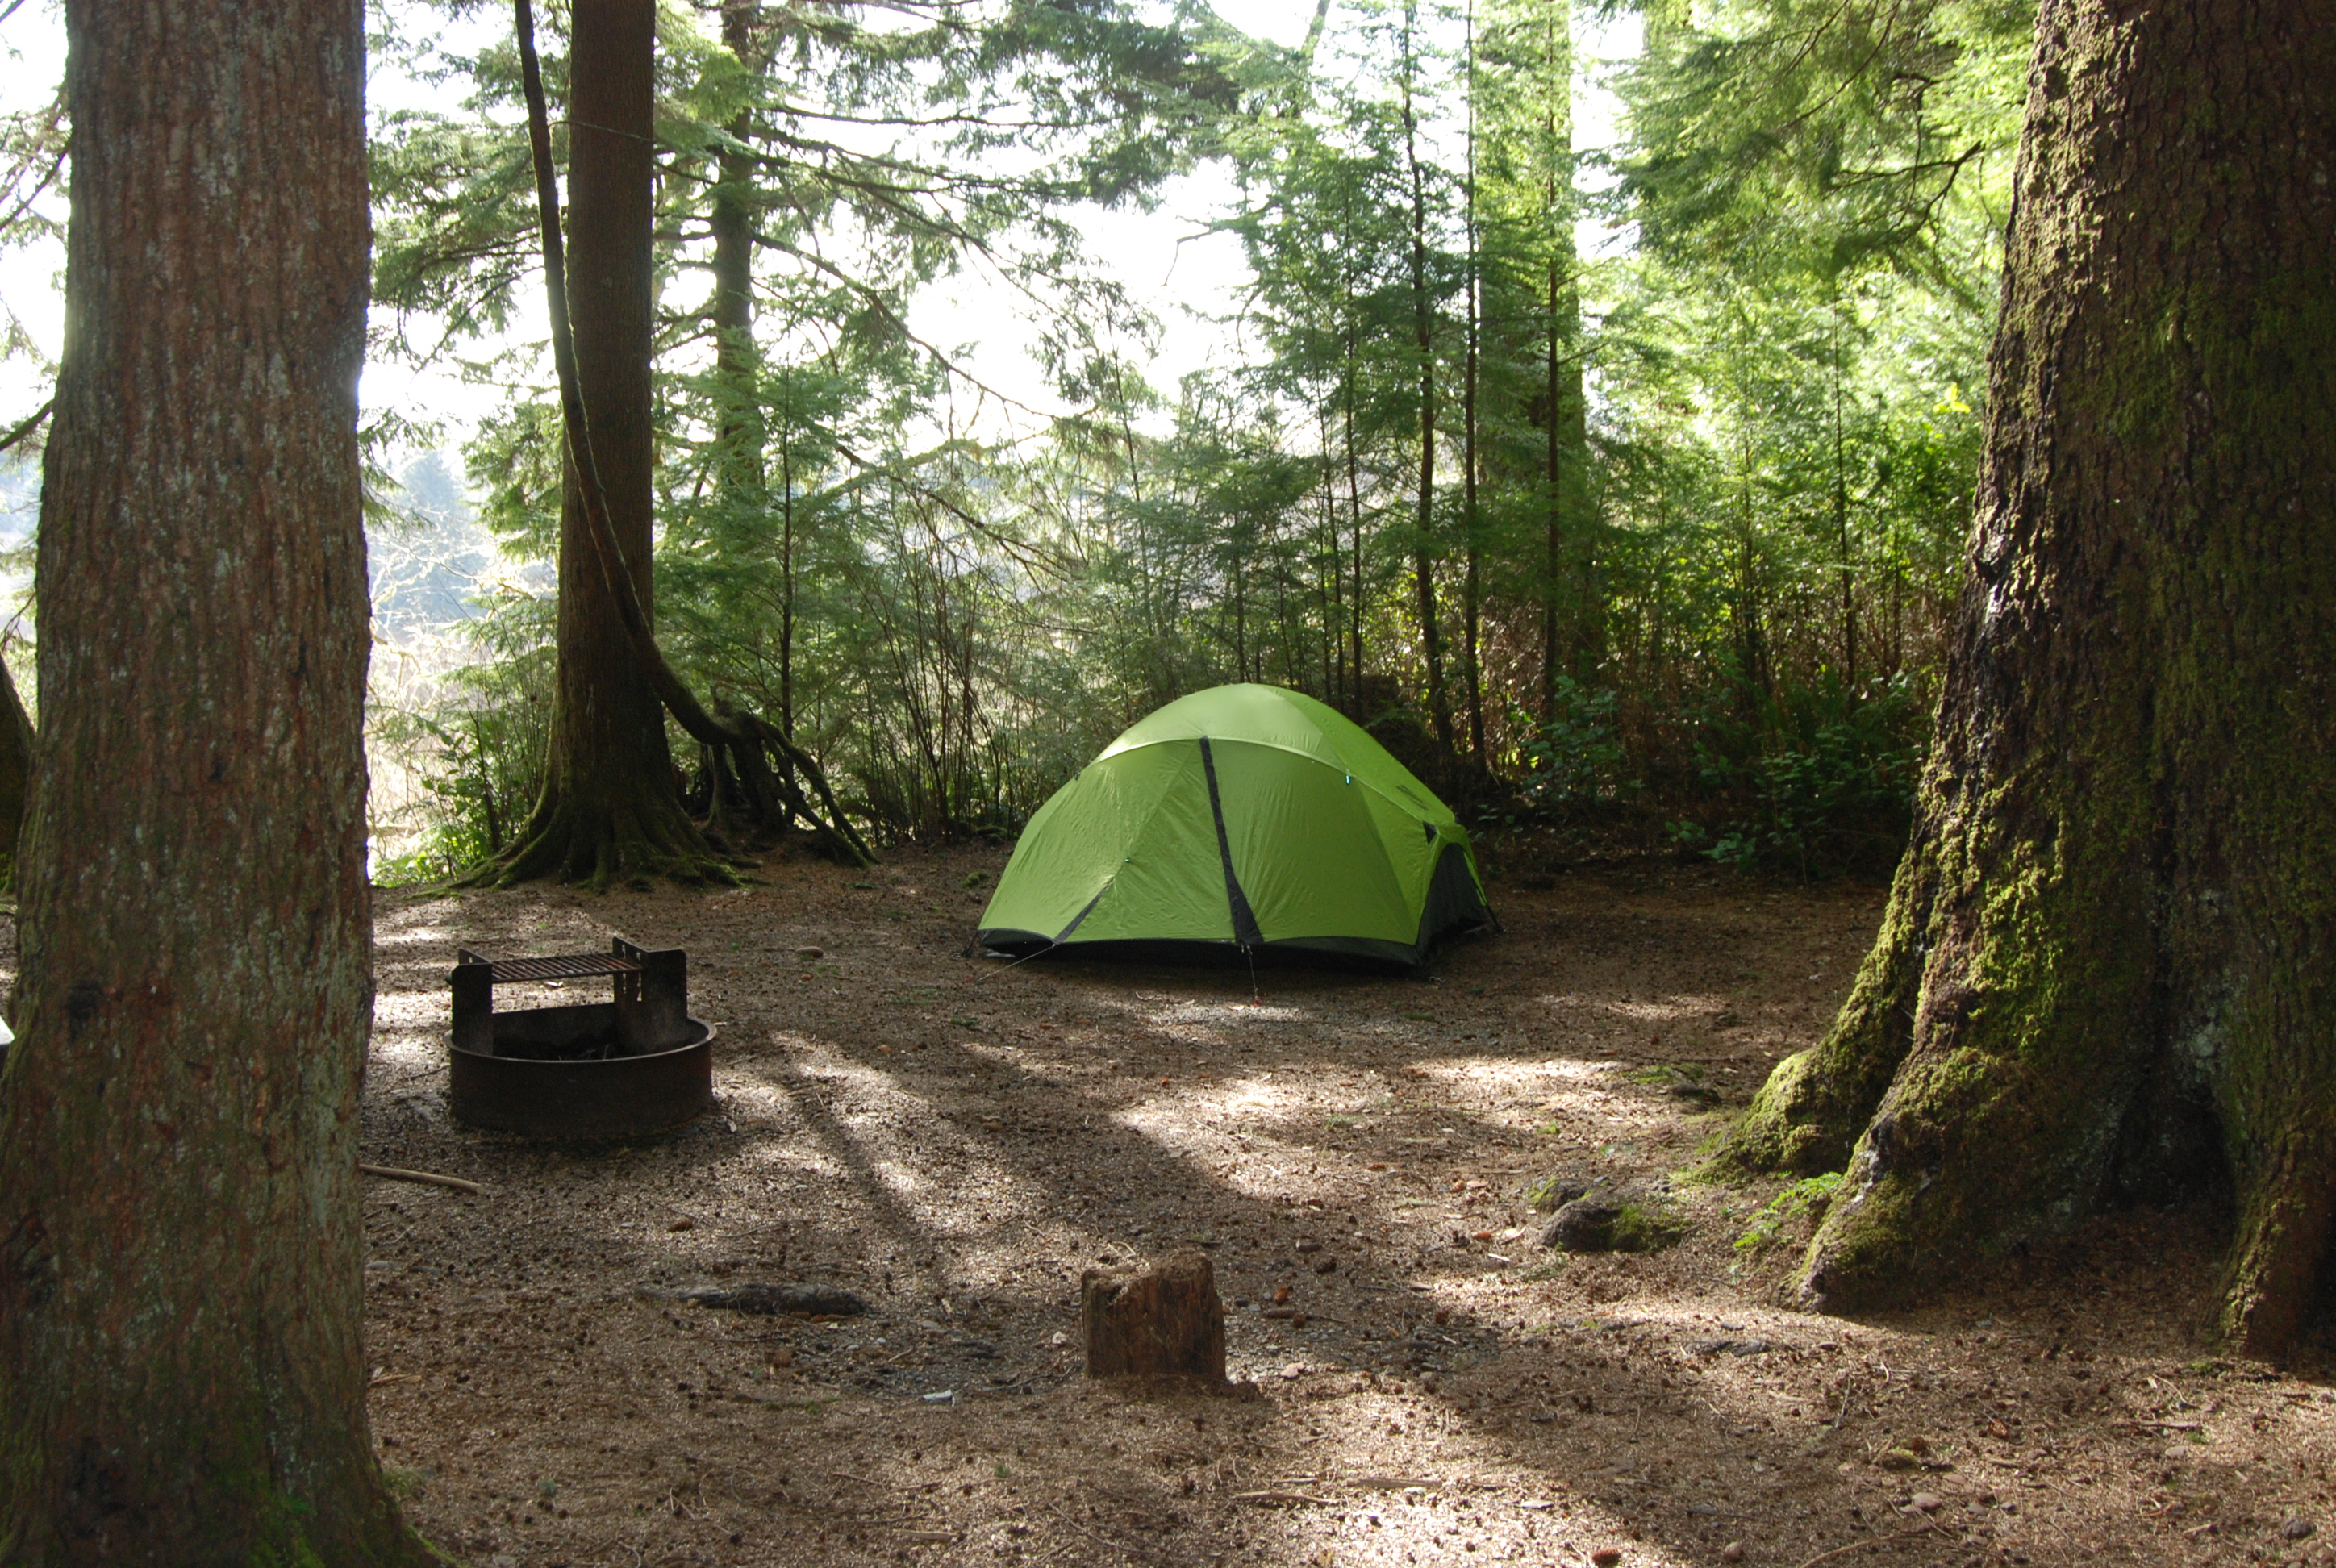 A tent set up in a forested campsite.